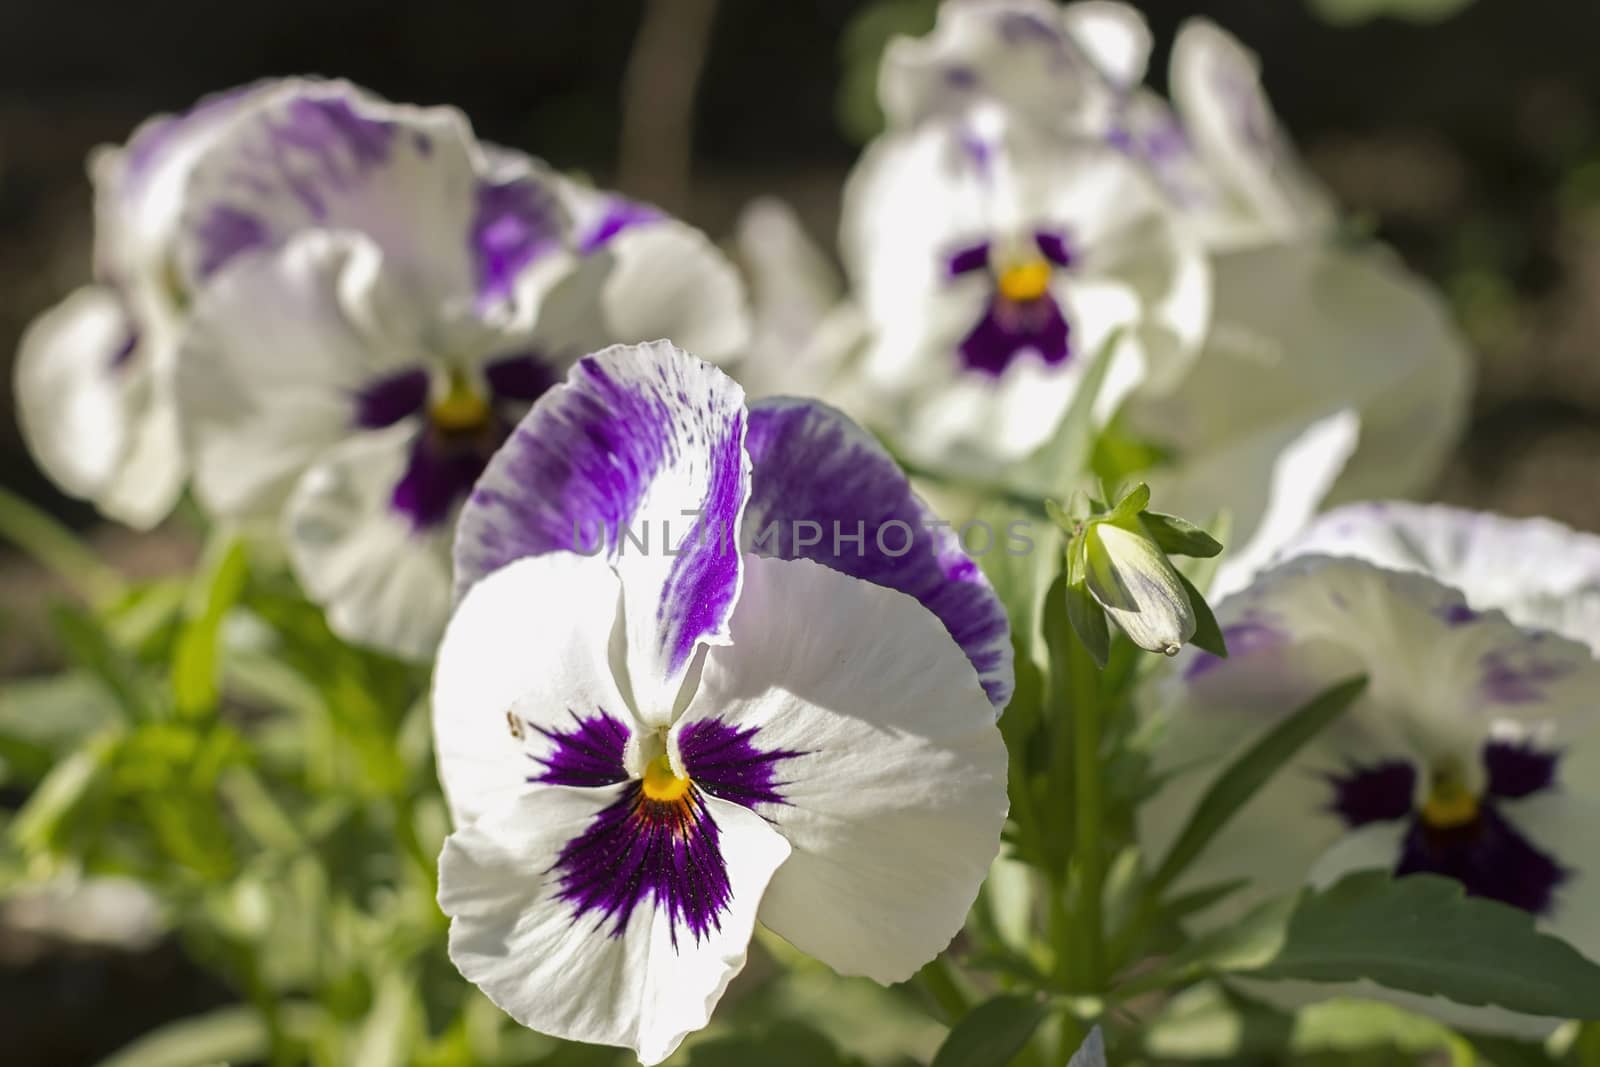 pansy flowers in a garden ornamental plants, soft focus